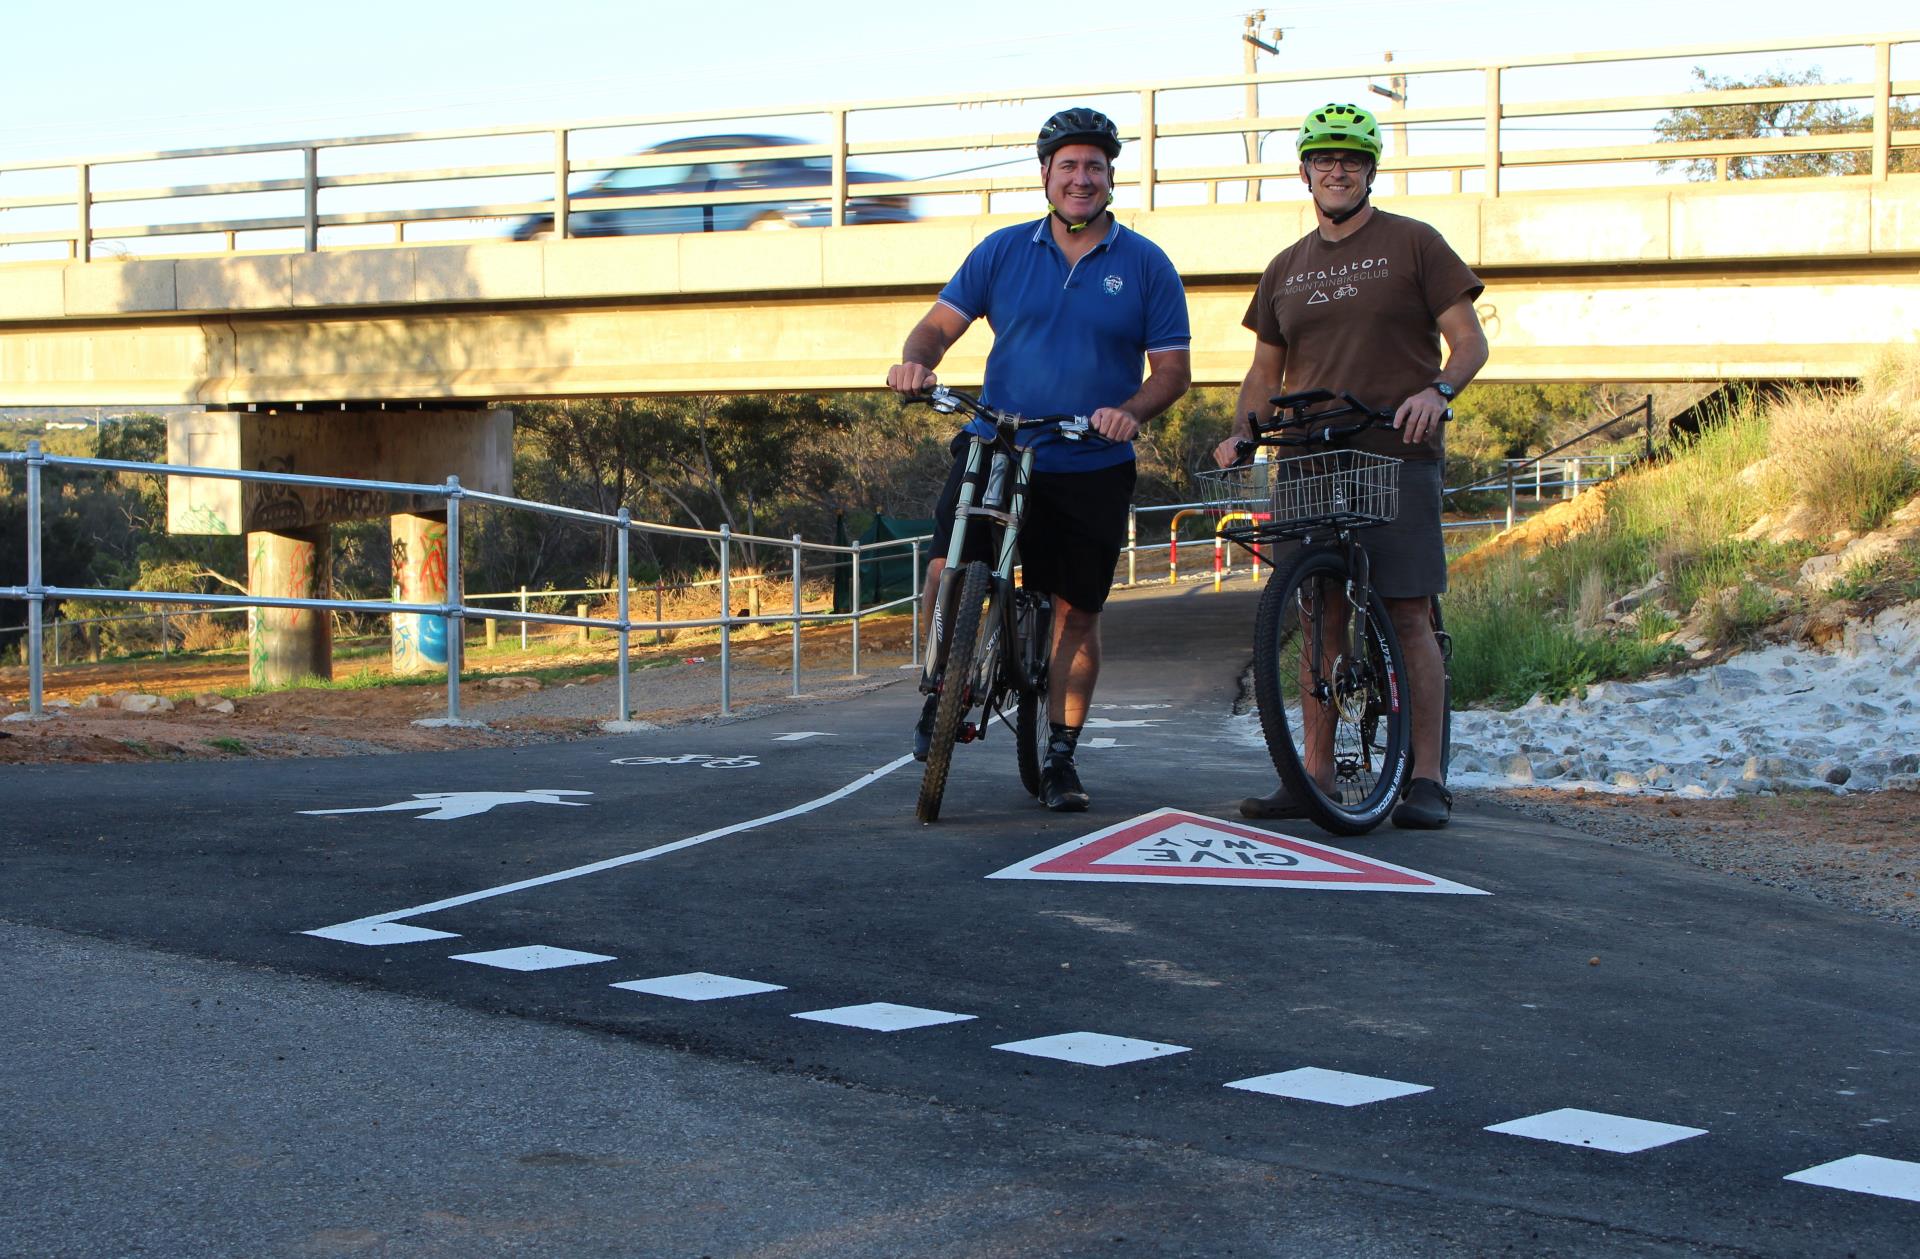 City of Greater Geraldton Mayor Shane Van Styn (left) and Geraldton Mountain Bike Club President Paul Spackman complete a test drive on the recently completed off road shared path located on the east side of the NWCH that links Green Street to Spalding Park via a fully accessible Chapman River bridge underpass.